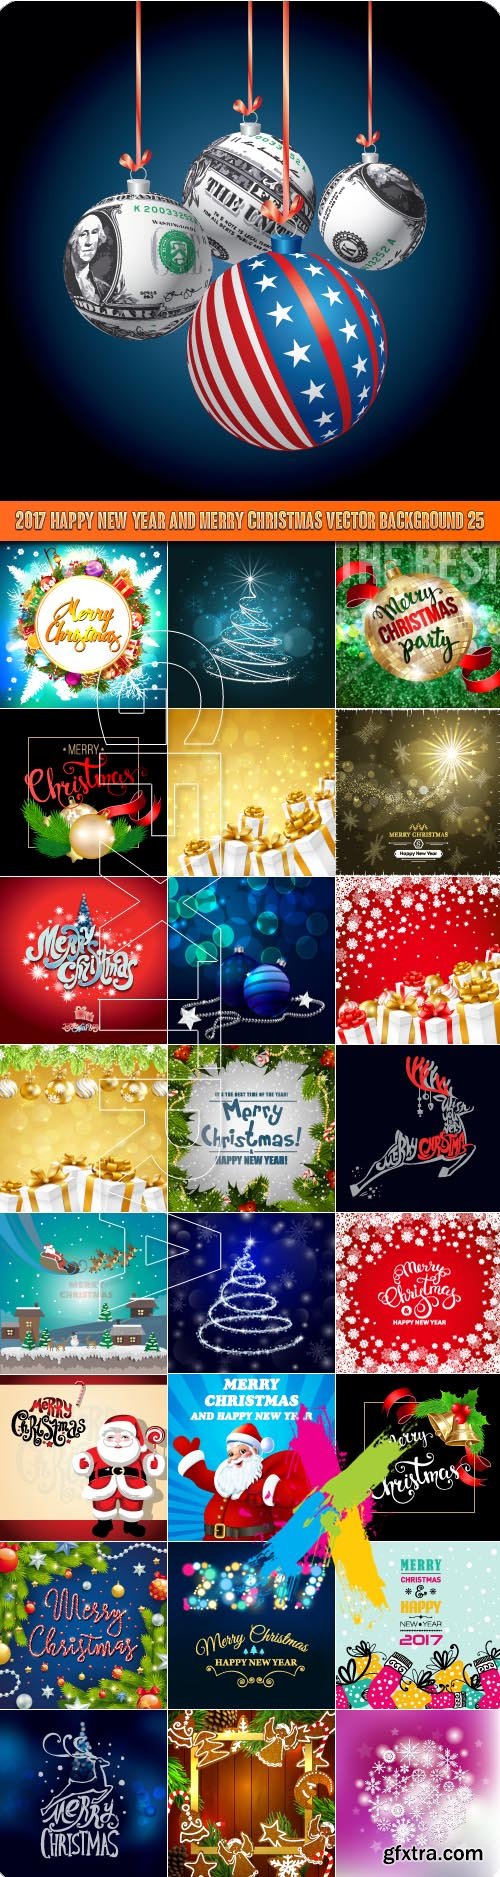 2017 Happy New Year and Merry Christmas vector background 25